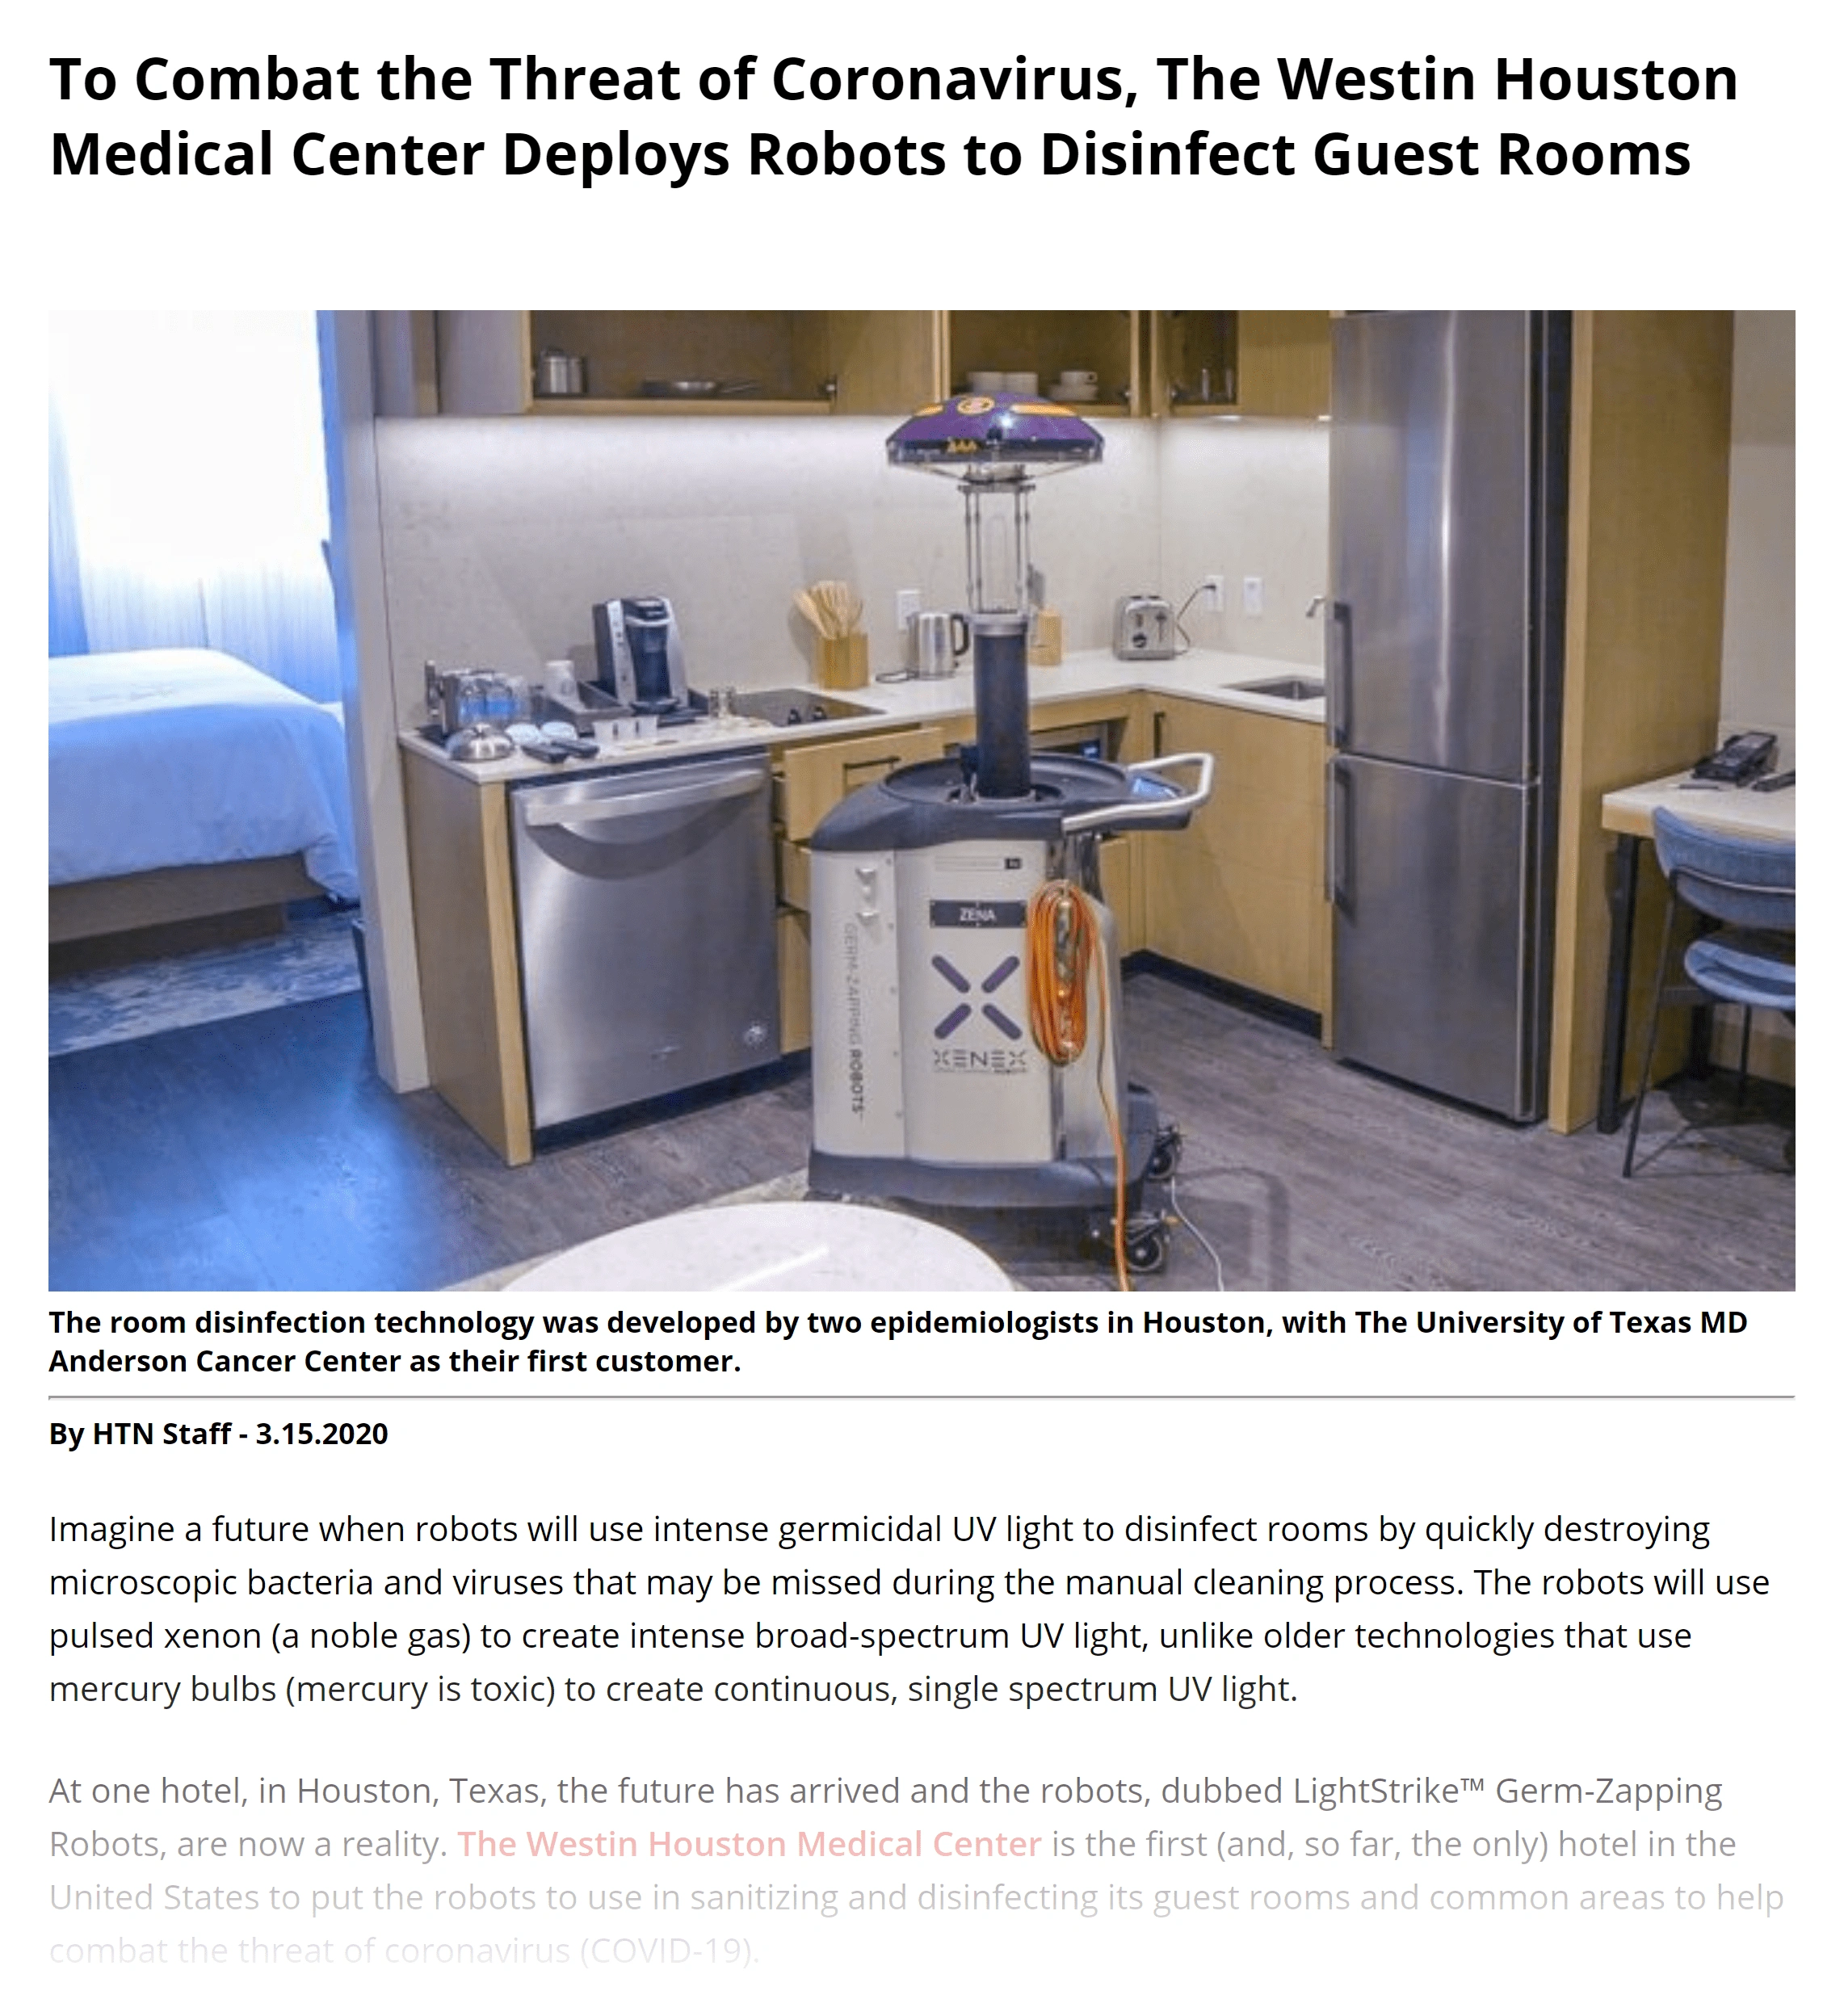 robots-disinfect-guest-rooms-min.png